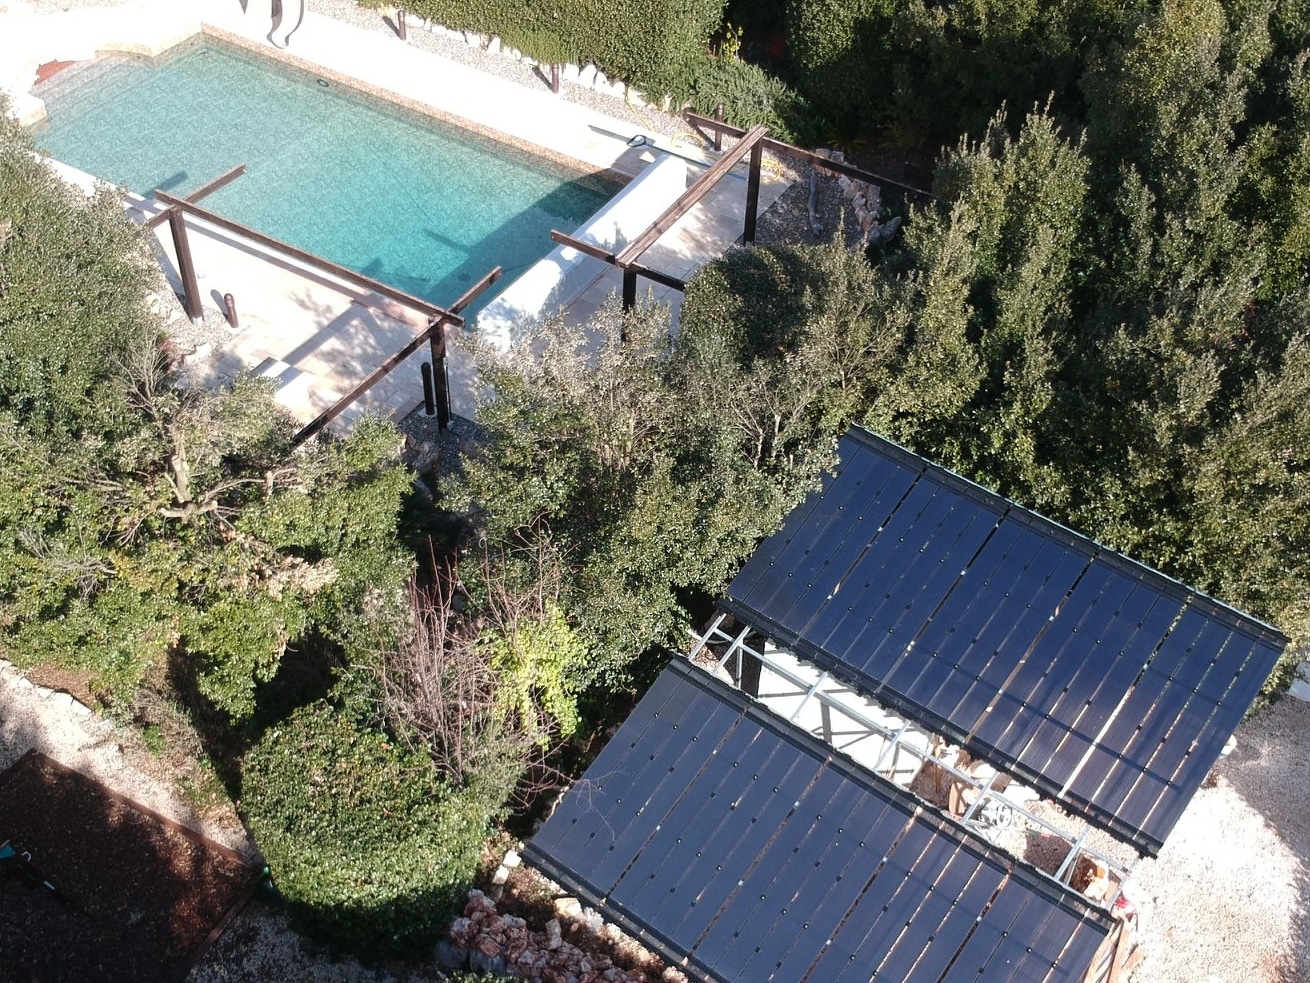 Solar pool heater tucked away out of sight behind the trees.